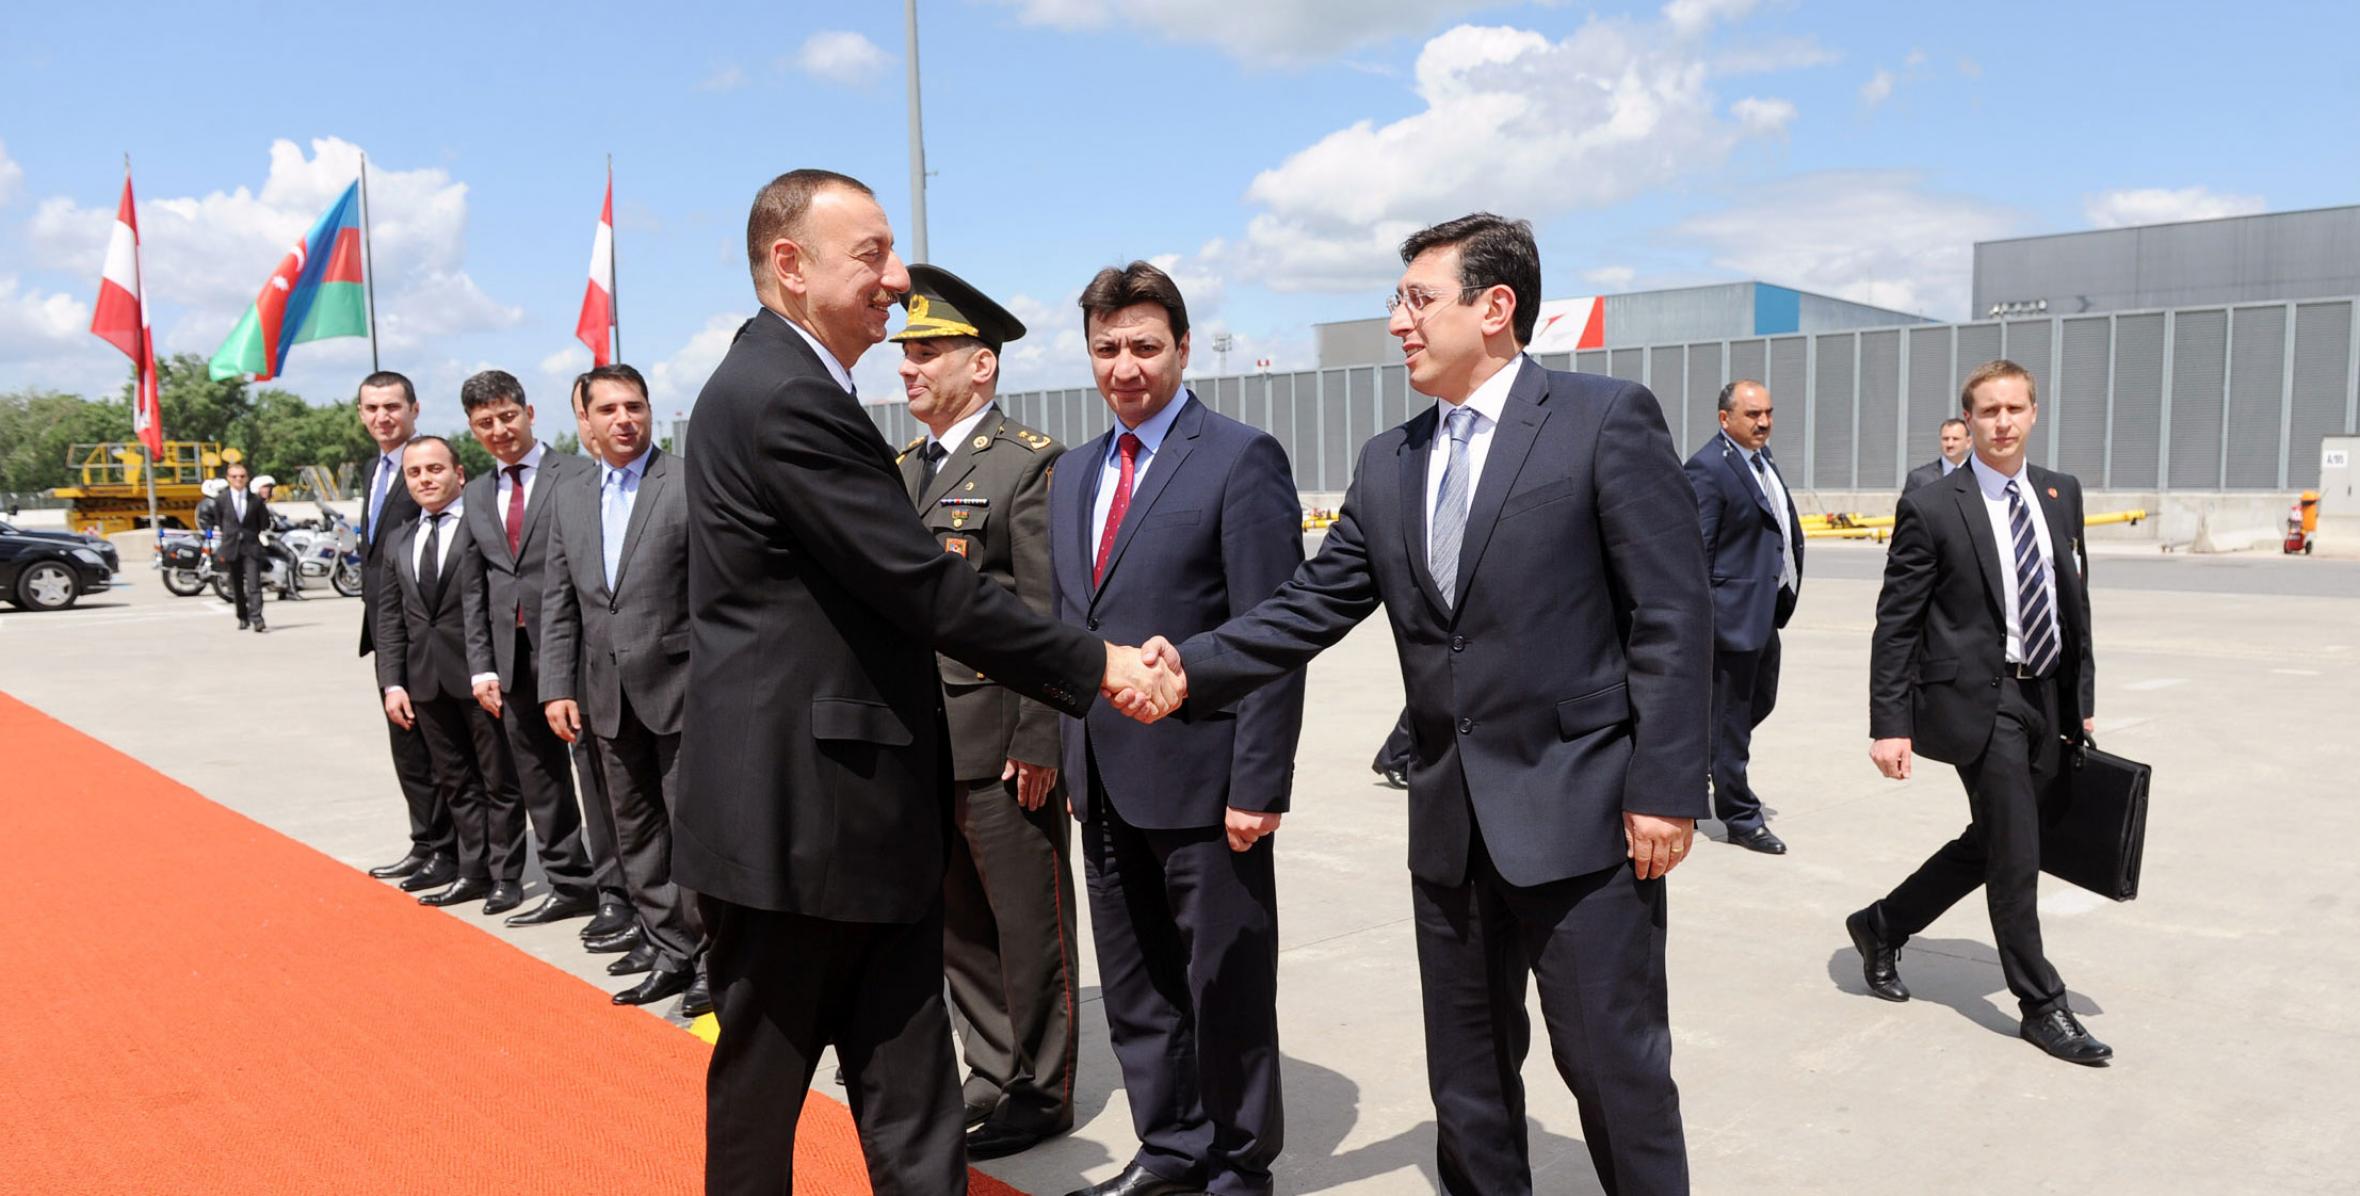 Official visit of Ilham Aliyev to Austria ended